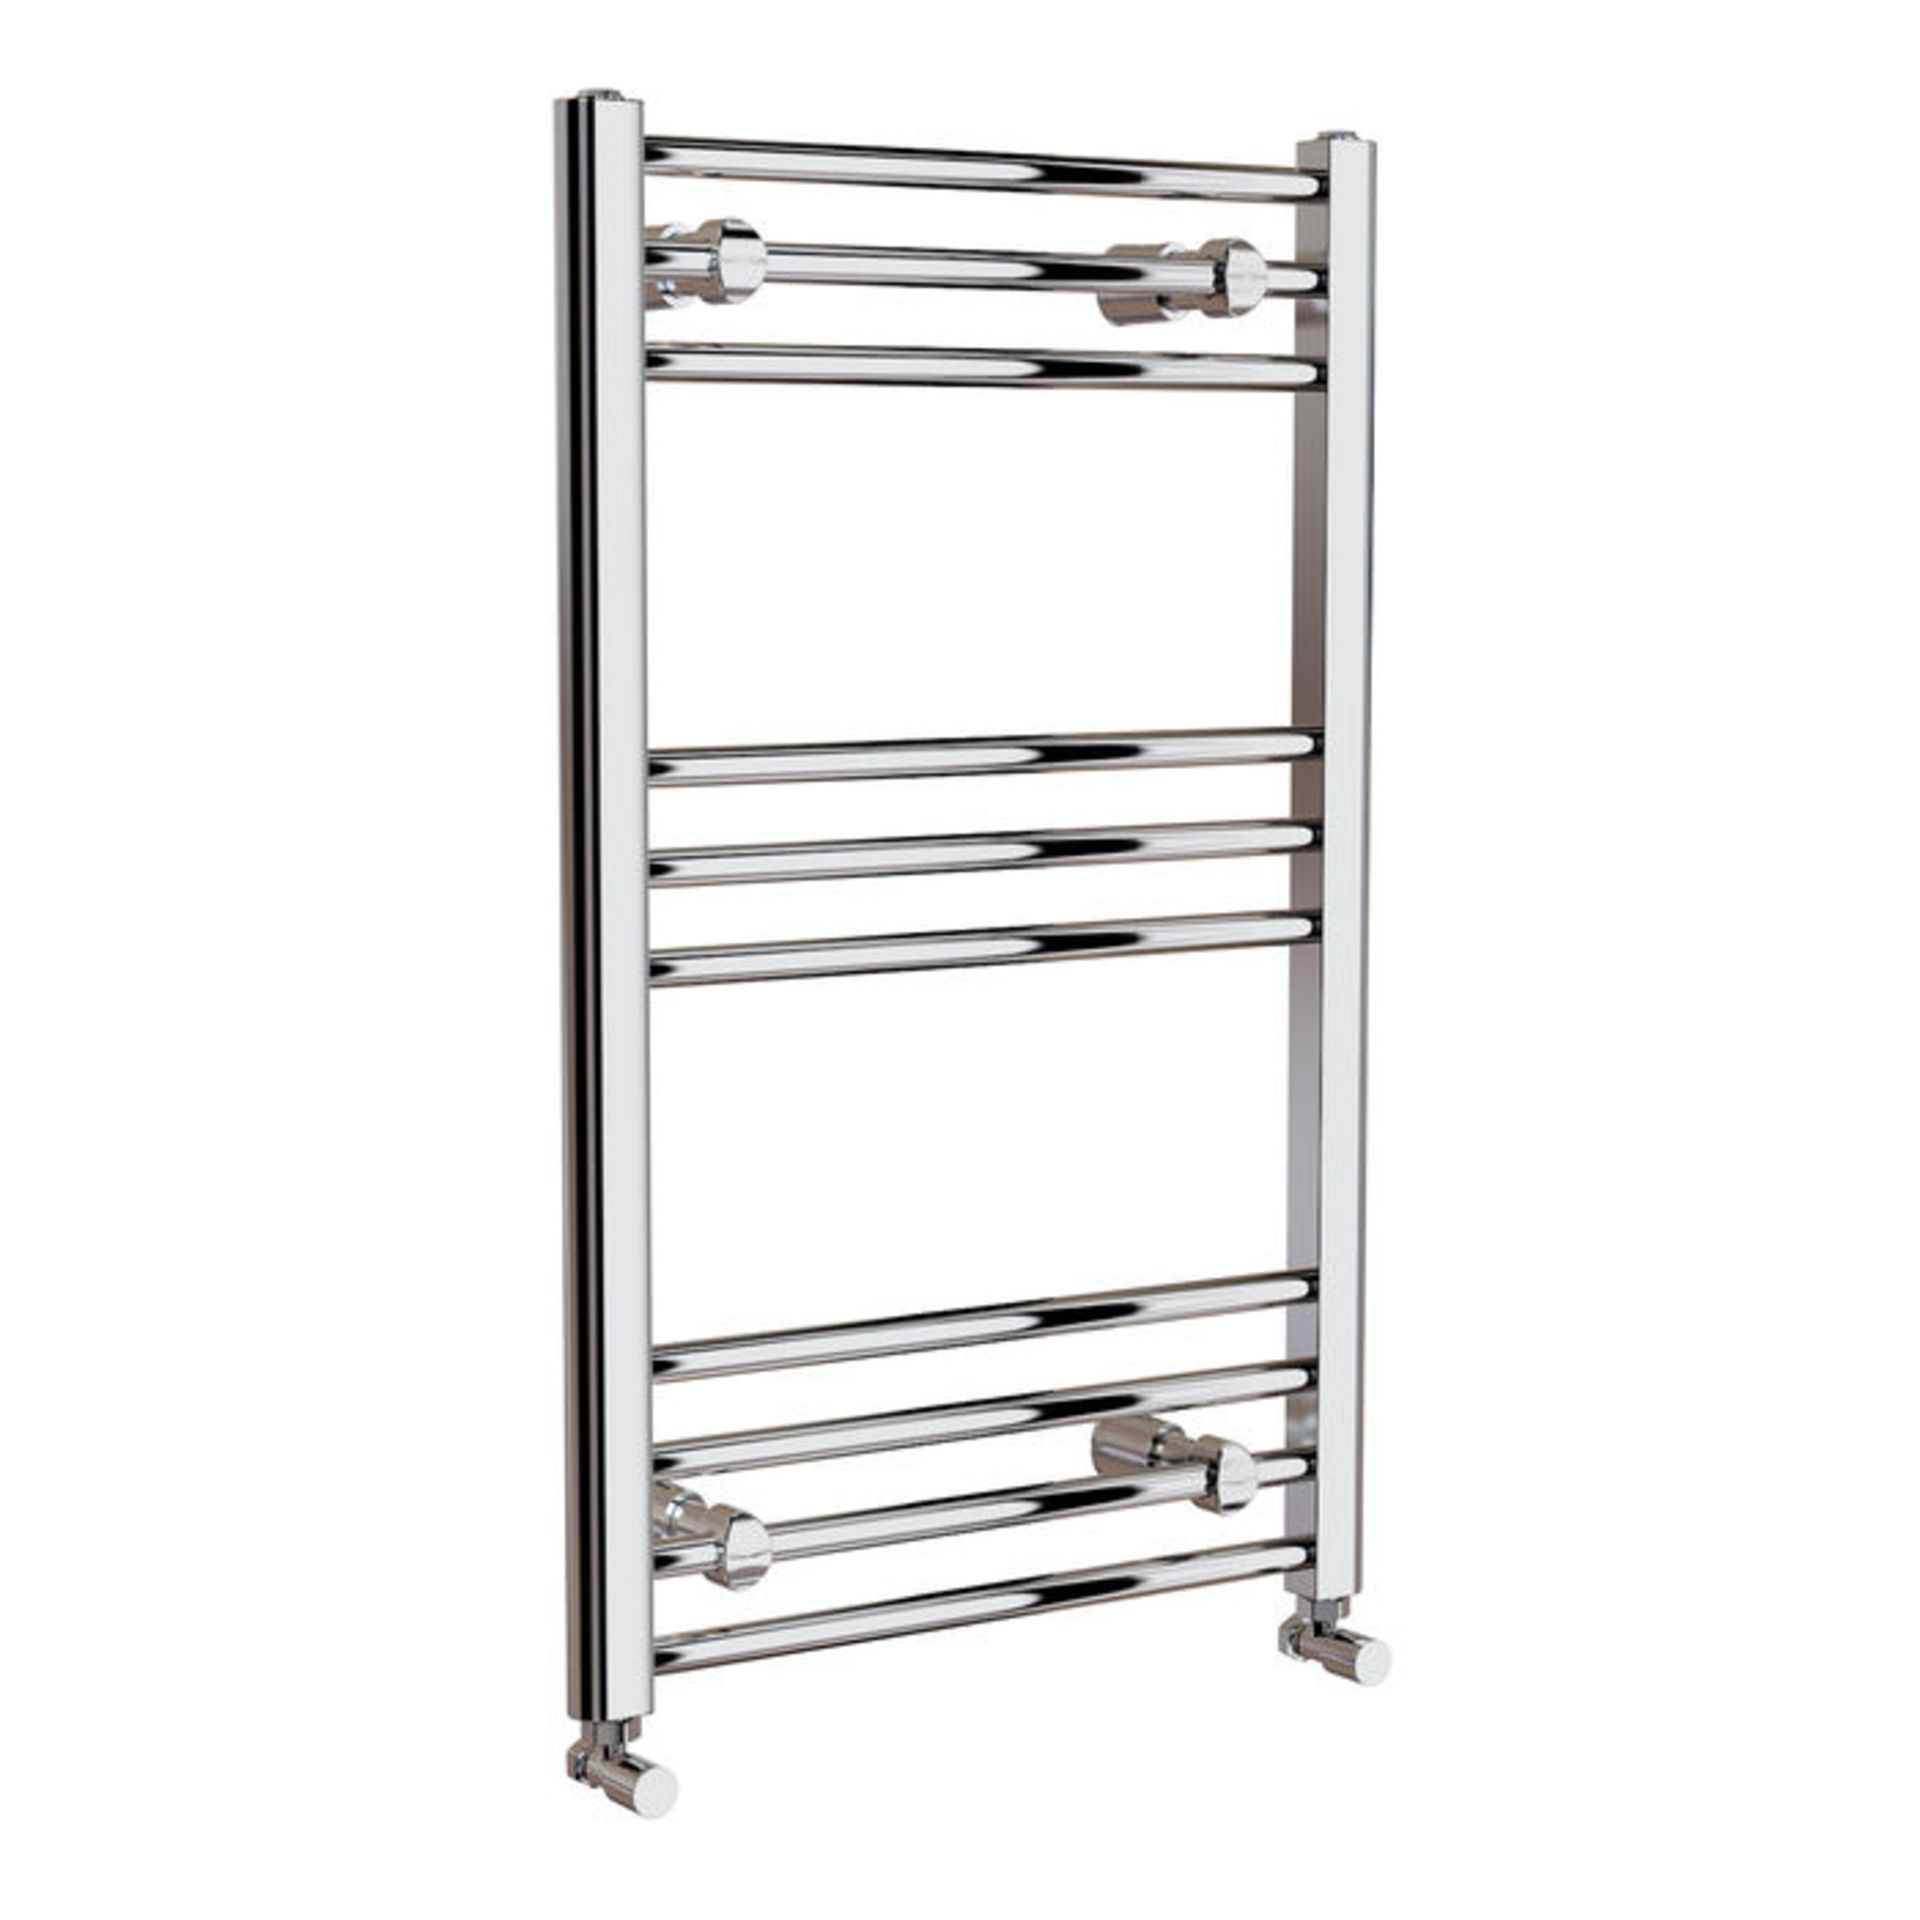 (L74) 800x500mm - 20mm Tubes - Chrome Heated Straight Rail Ladder Towel Radiator. Low carbon steel - Image 2 of 3